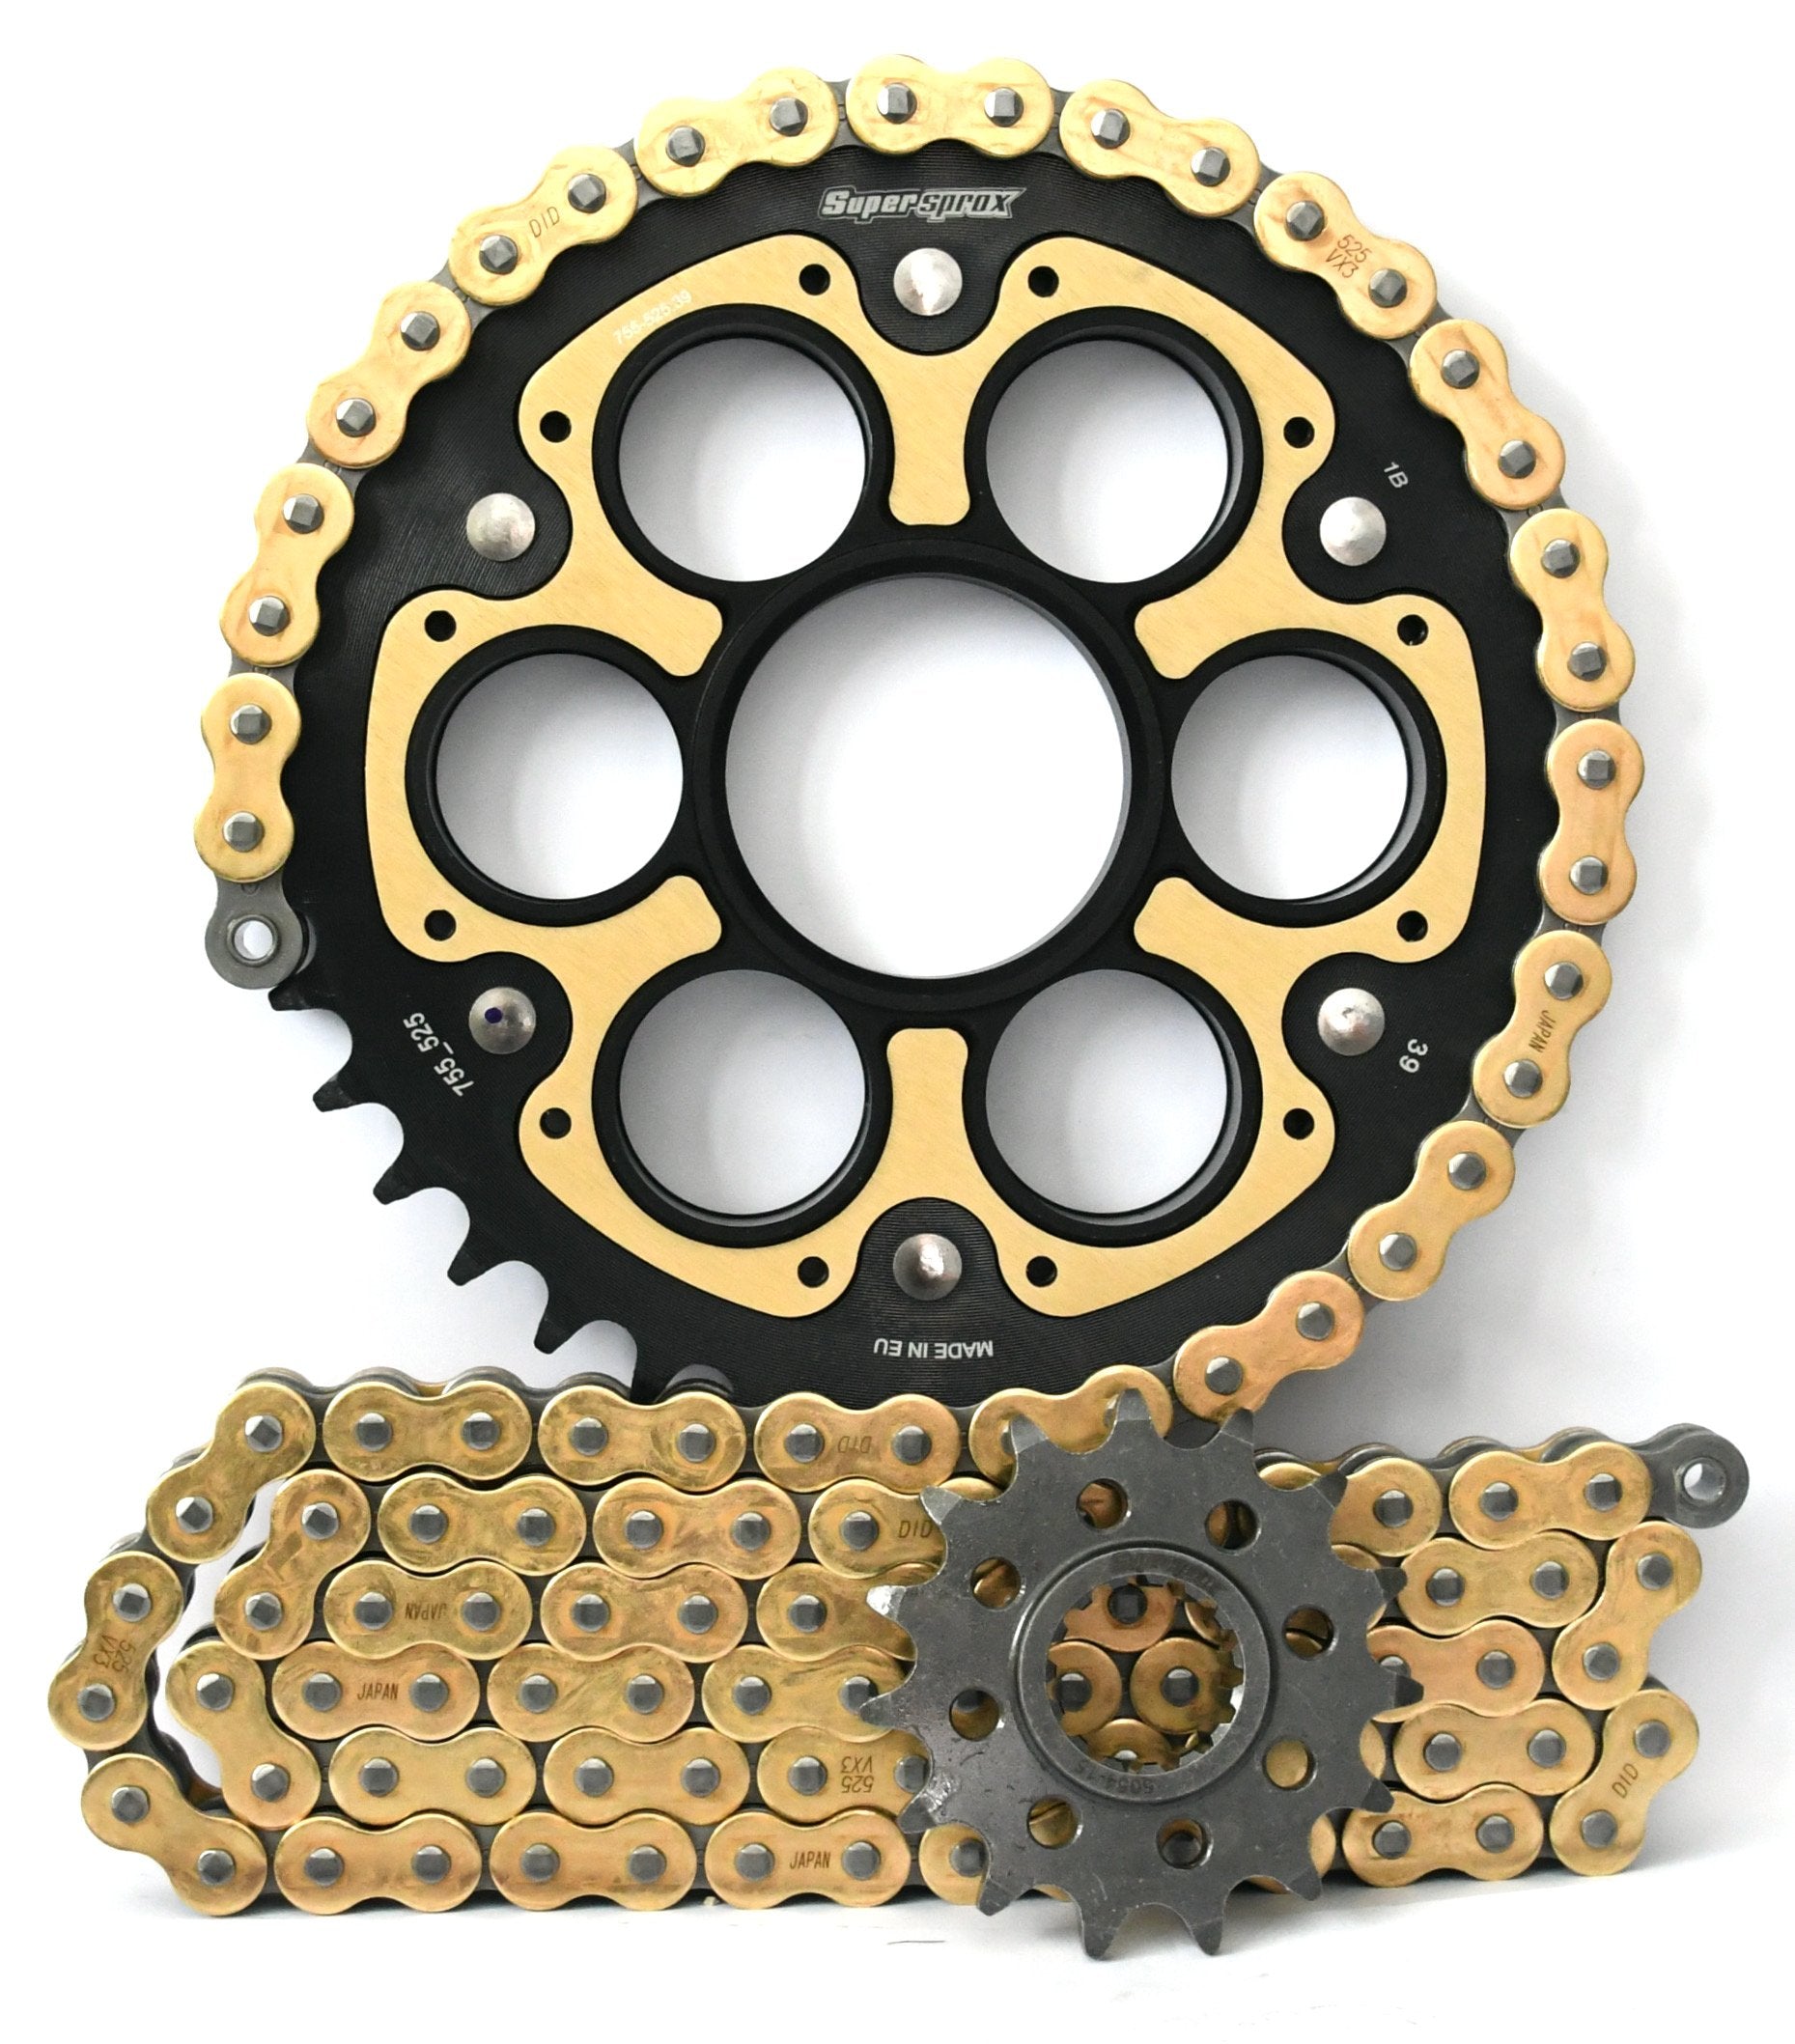 Supersprox Chain & Sprocket Kit for Ducati Diavel 1260 2018> - Standard Gearing - 0